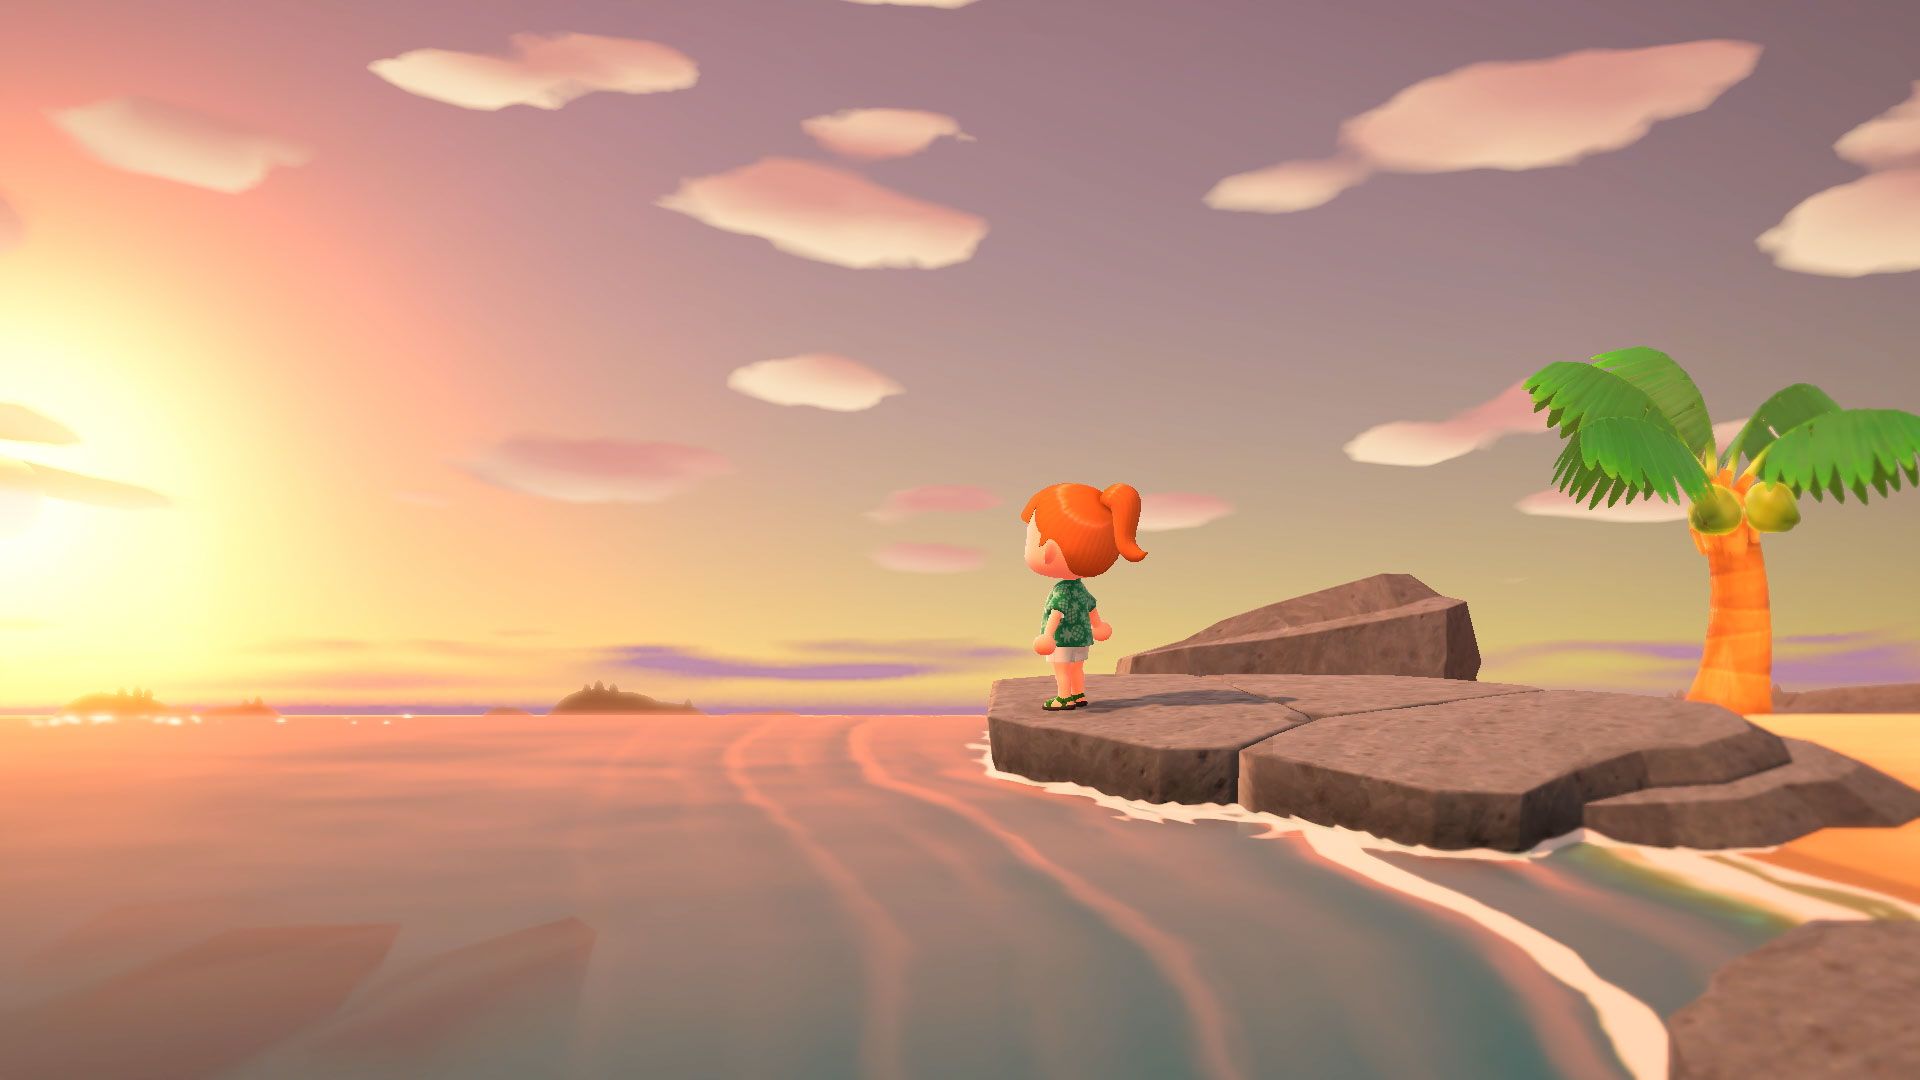 Nintendo's 'Animal Crossing: New Horizons' is an island escape